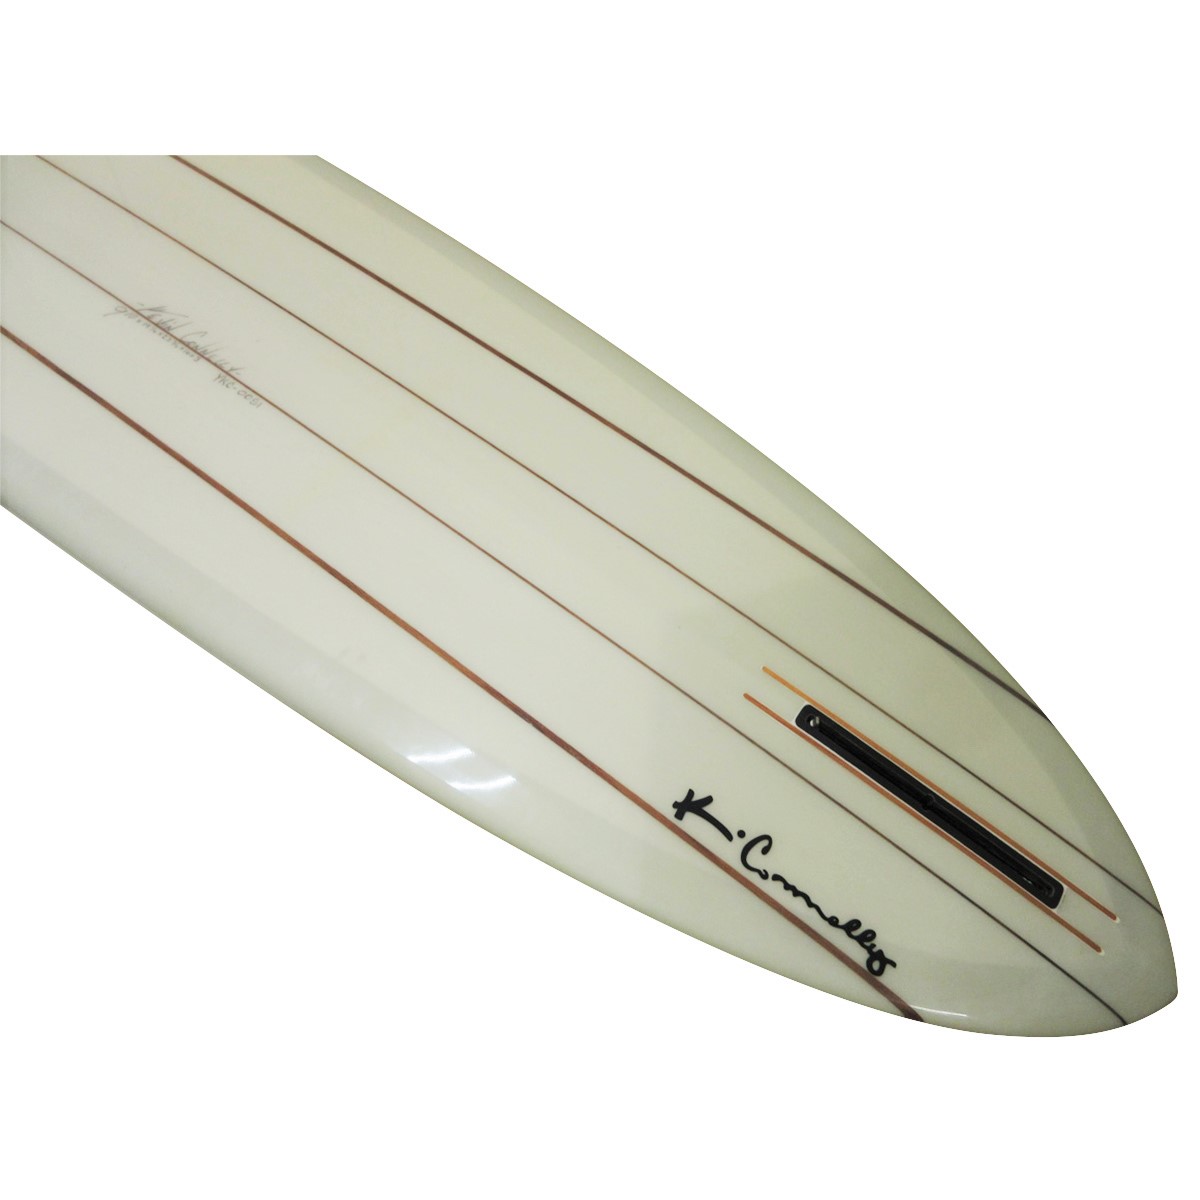 YU SURF CLASSIC / ROUND PIN NOSERIDER 9`6 Shaped By KEVIN CONNELLY